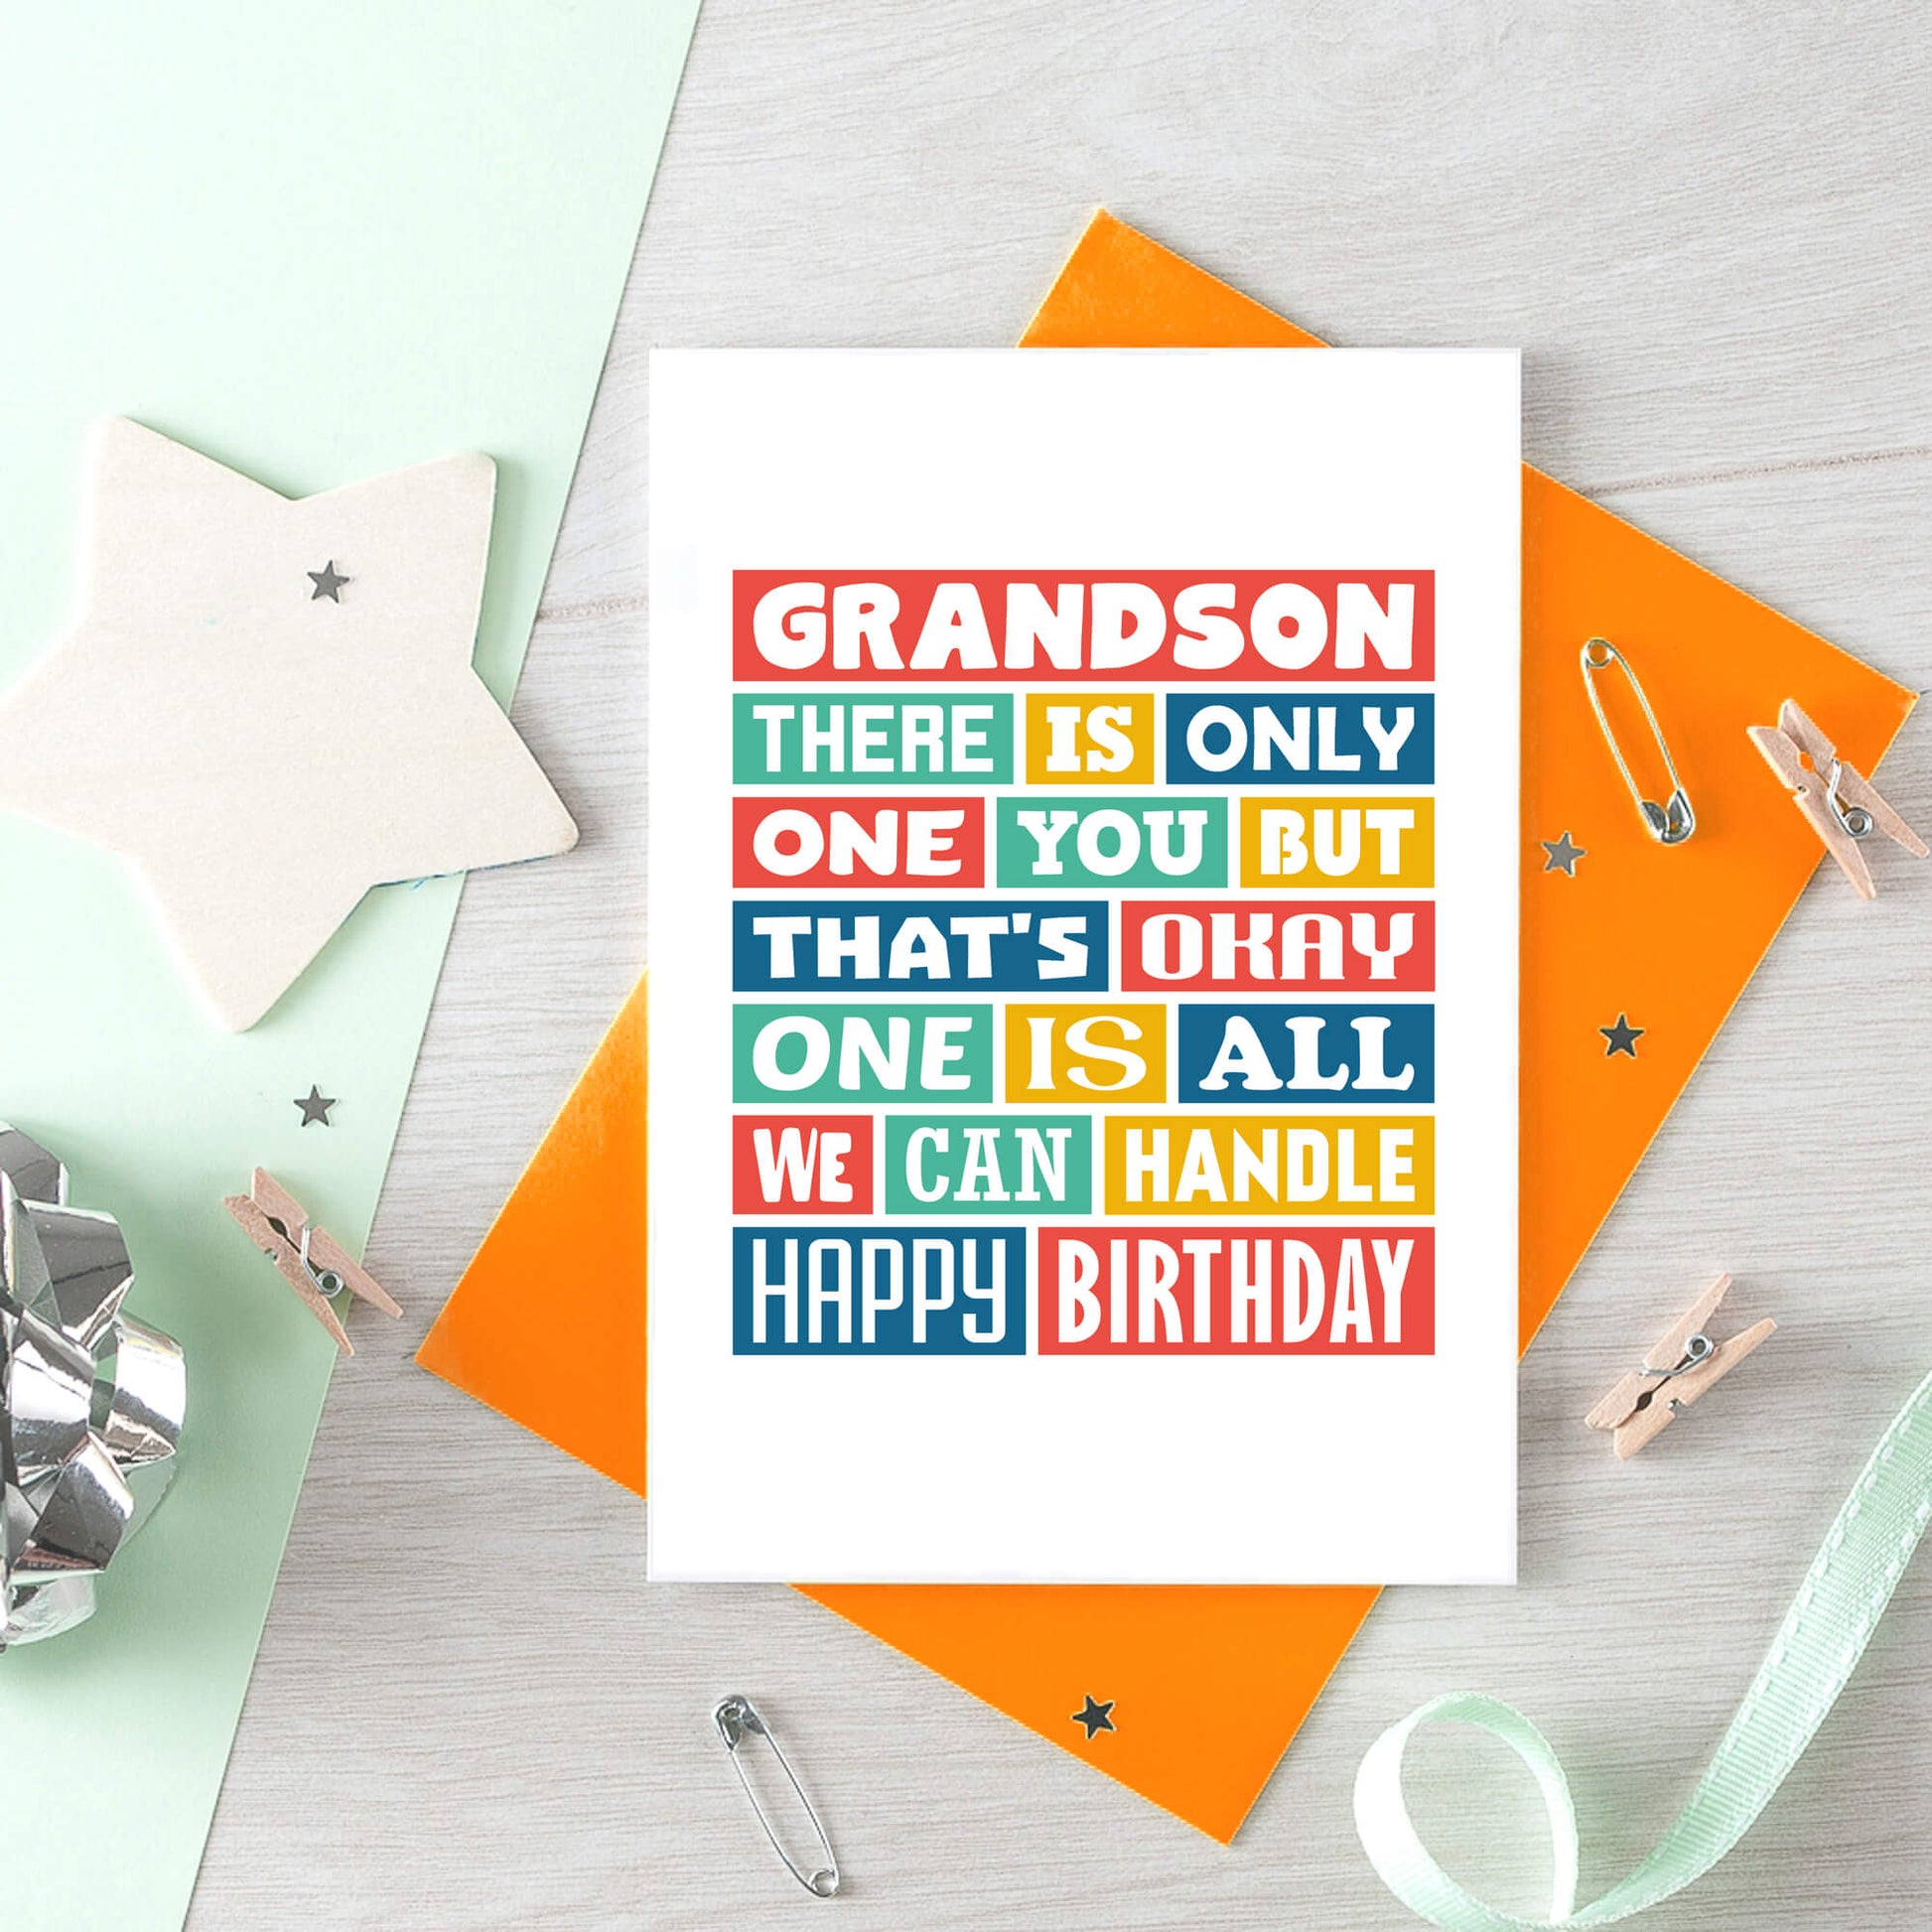 Grandson Birthday Card by SixElevenCreations. Reads Grandson There is only one you but that's okay. One is all we can handle. Happy birthday. Product Code SE0347A6